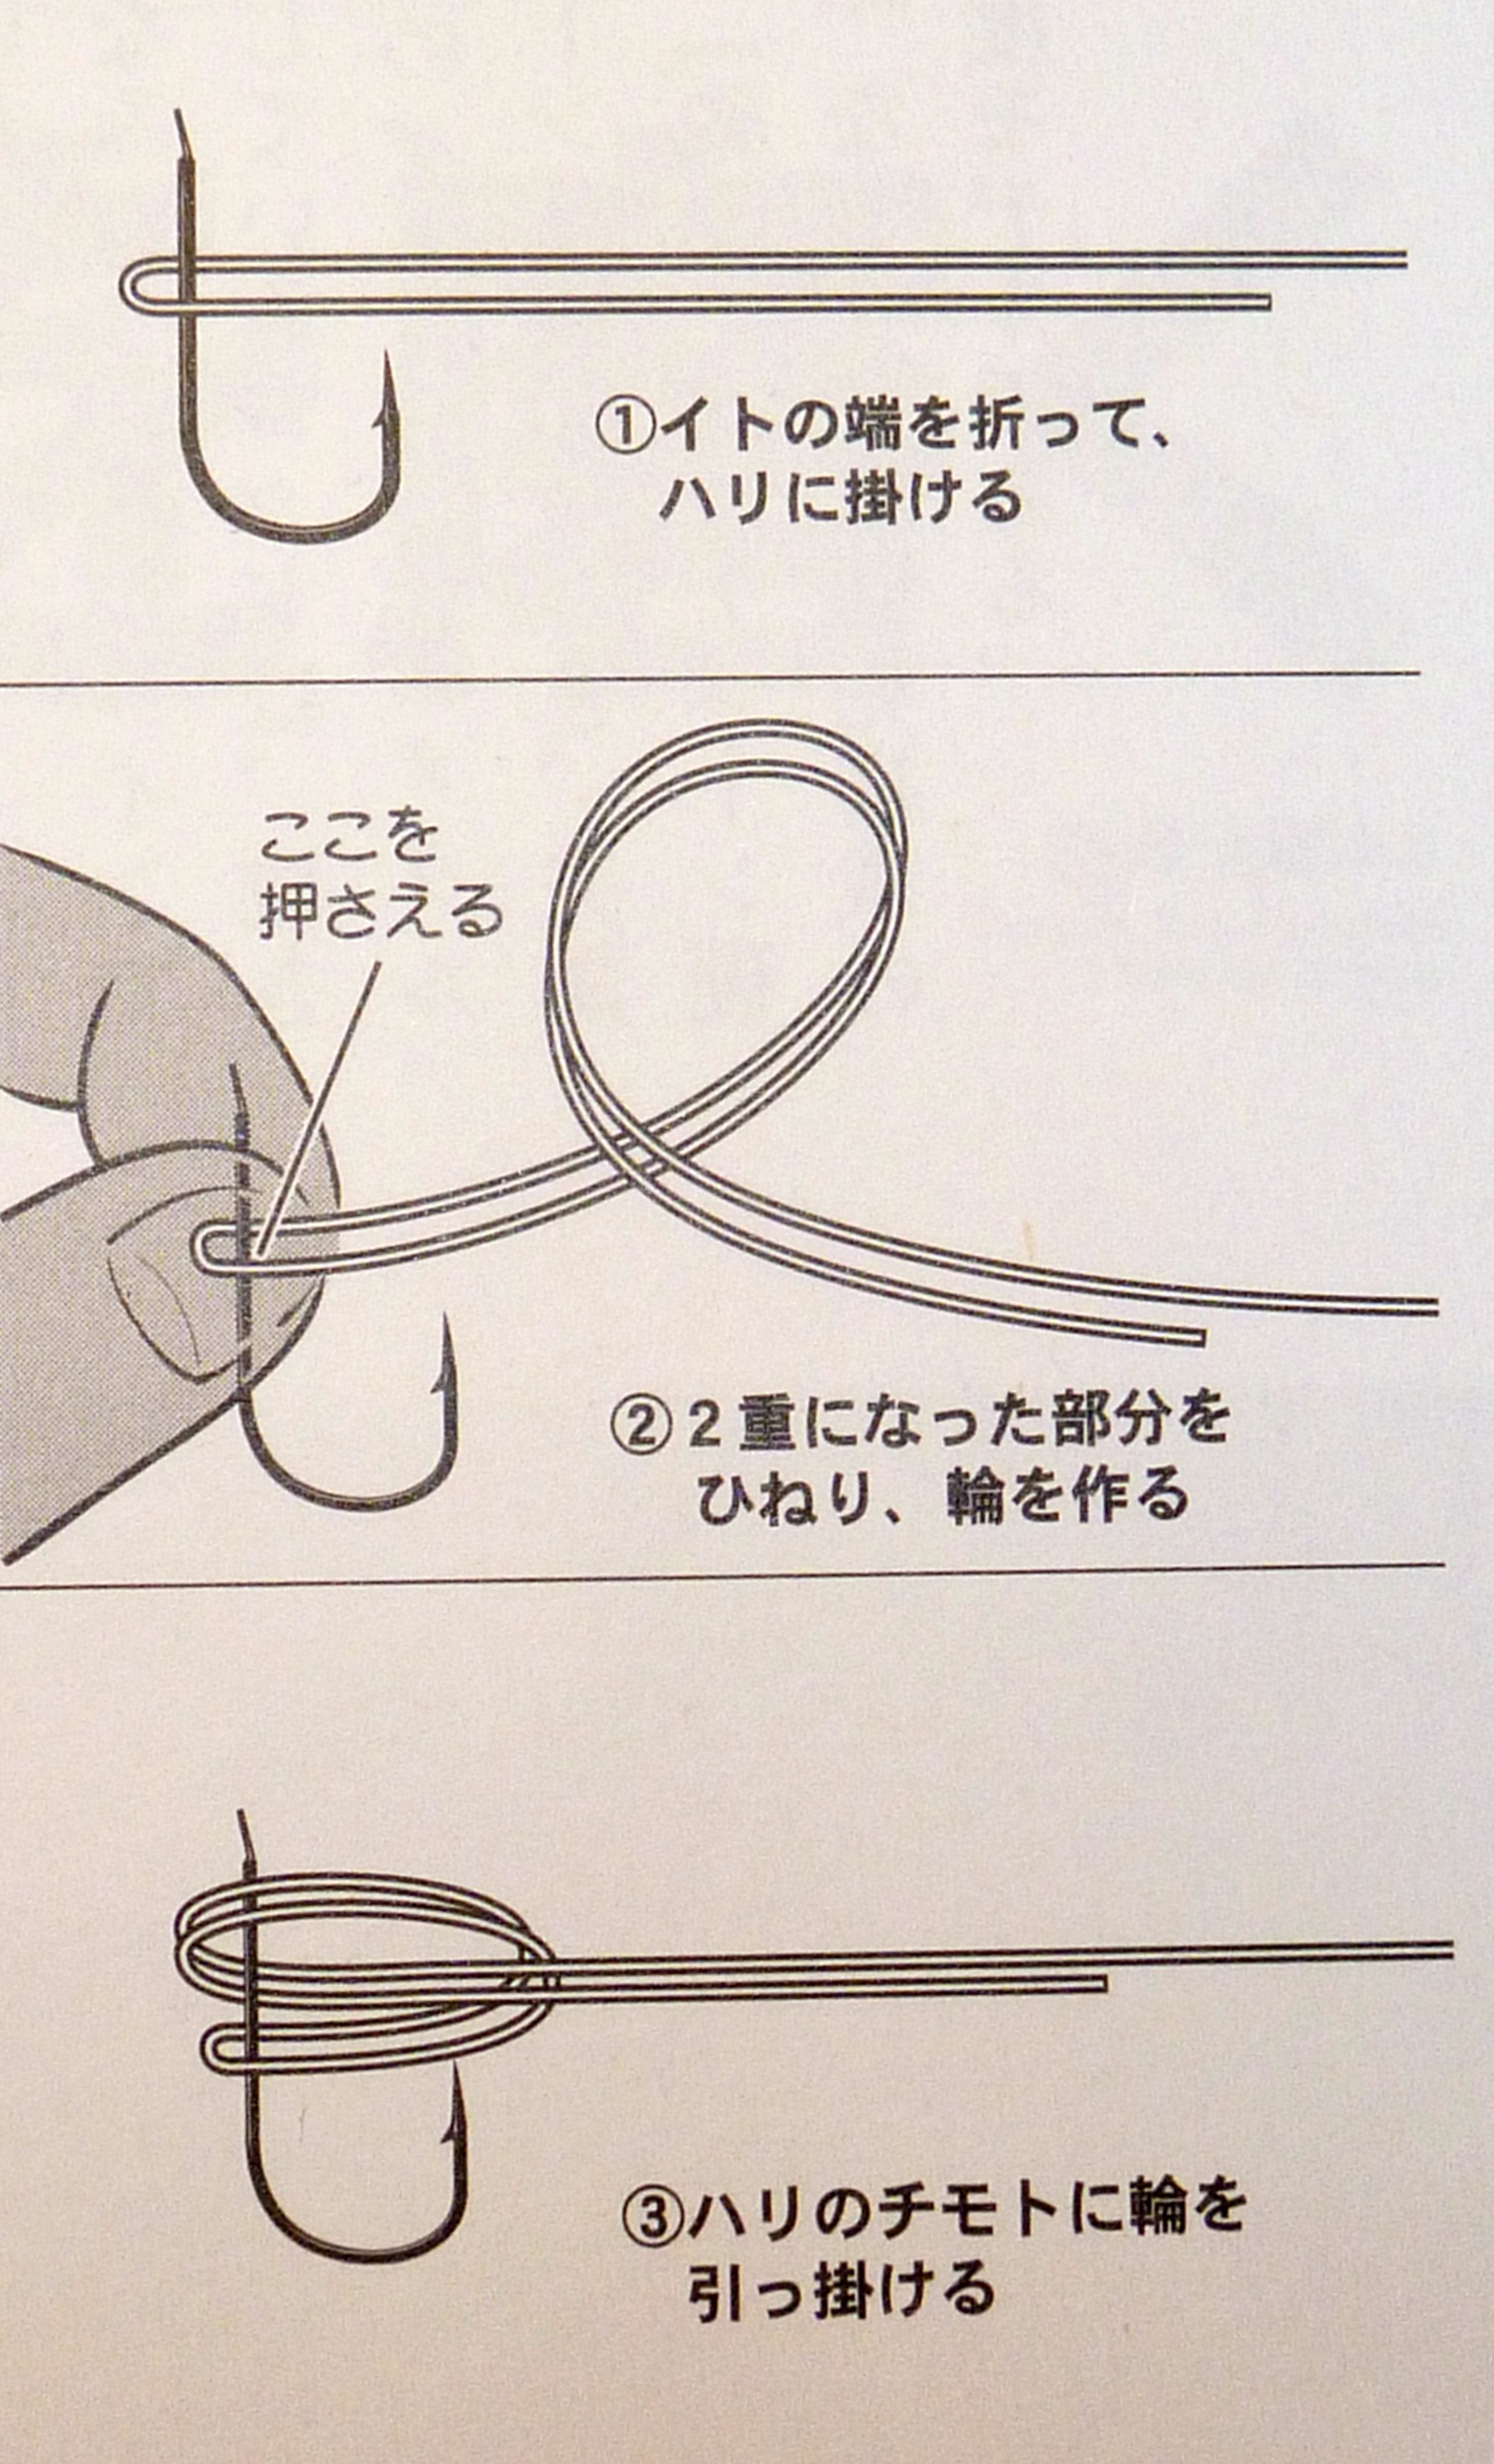 Illustration showing simple method of snelling a hook. Steps explained in text below.